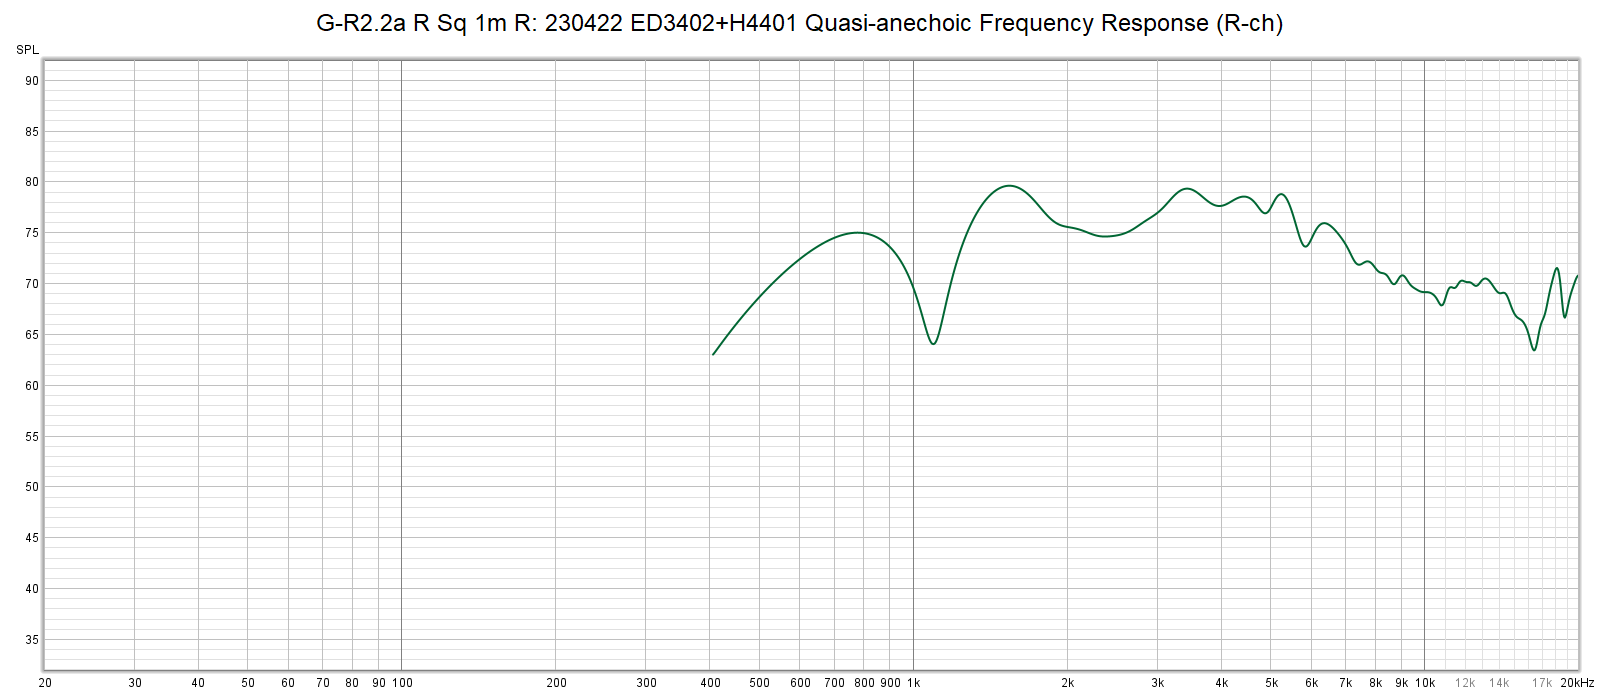 ED3402＋H4401 Frequency Response - Squawker only